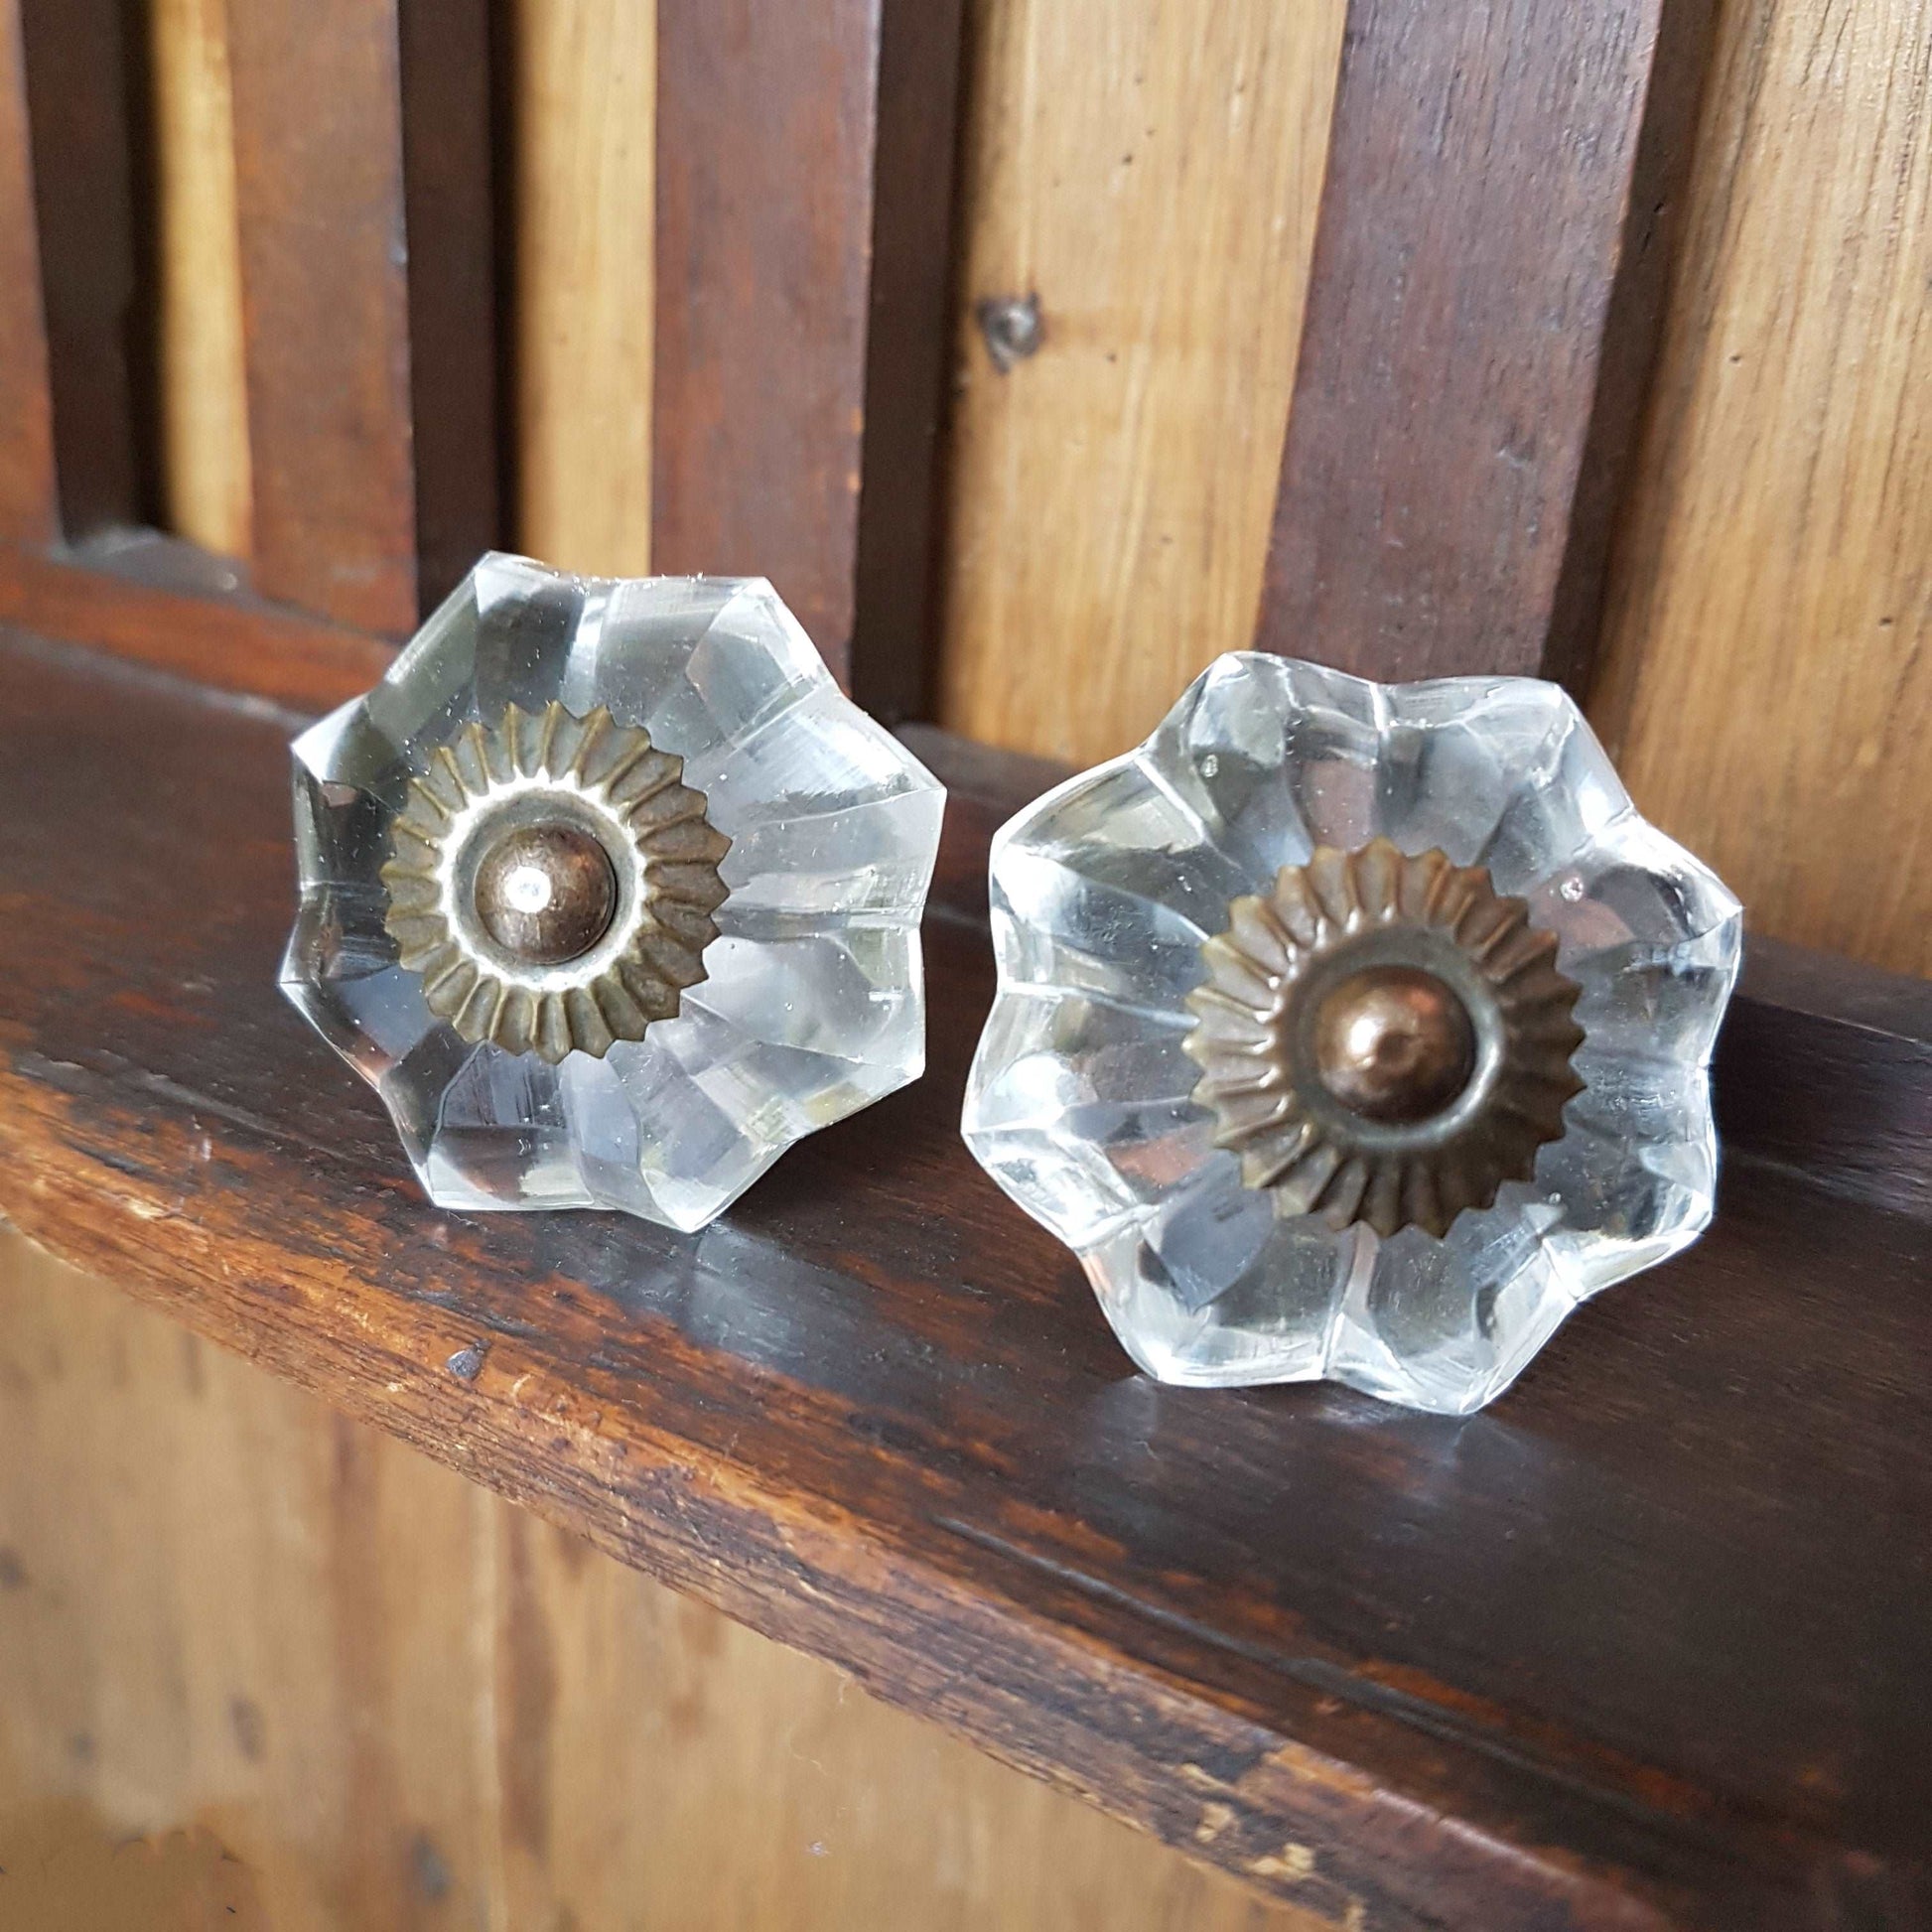 12 clear crystal cabinet knobs. Cut glass pulls in melon shape.